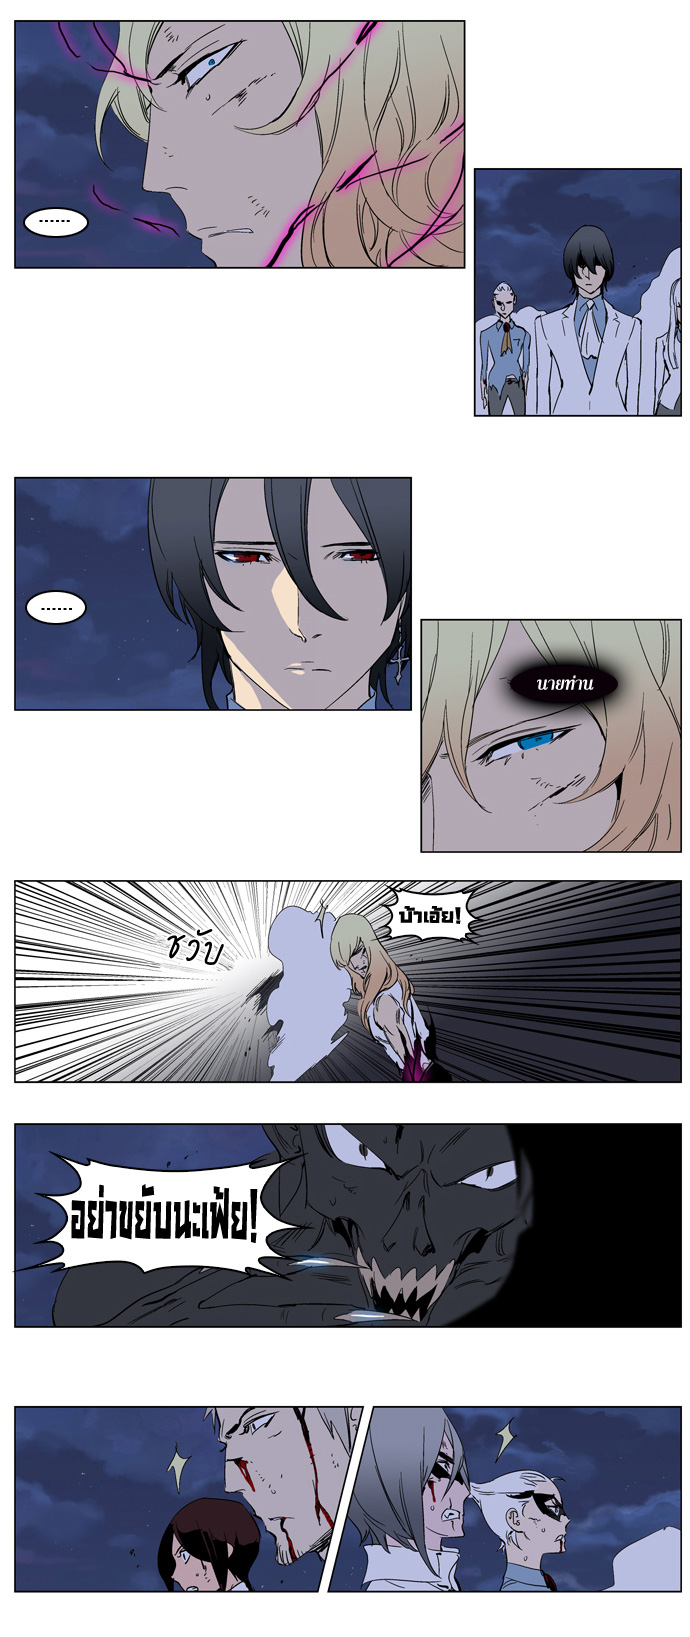 Noblesse 233 015